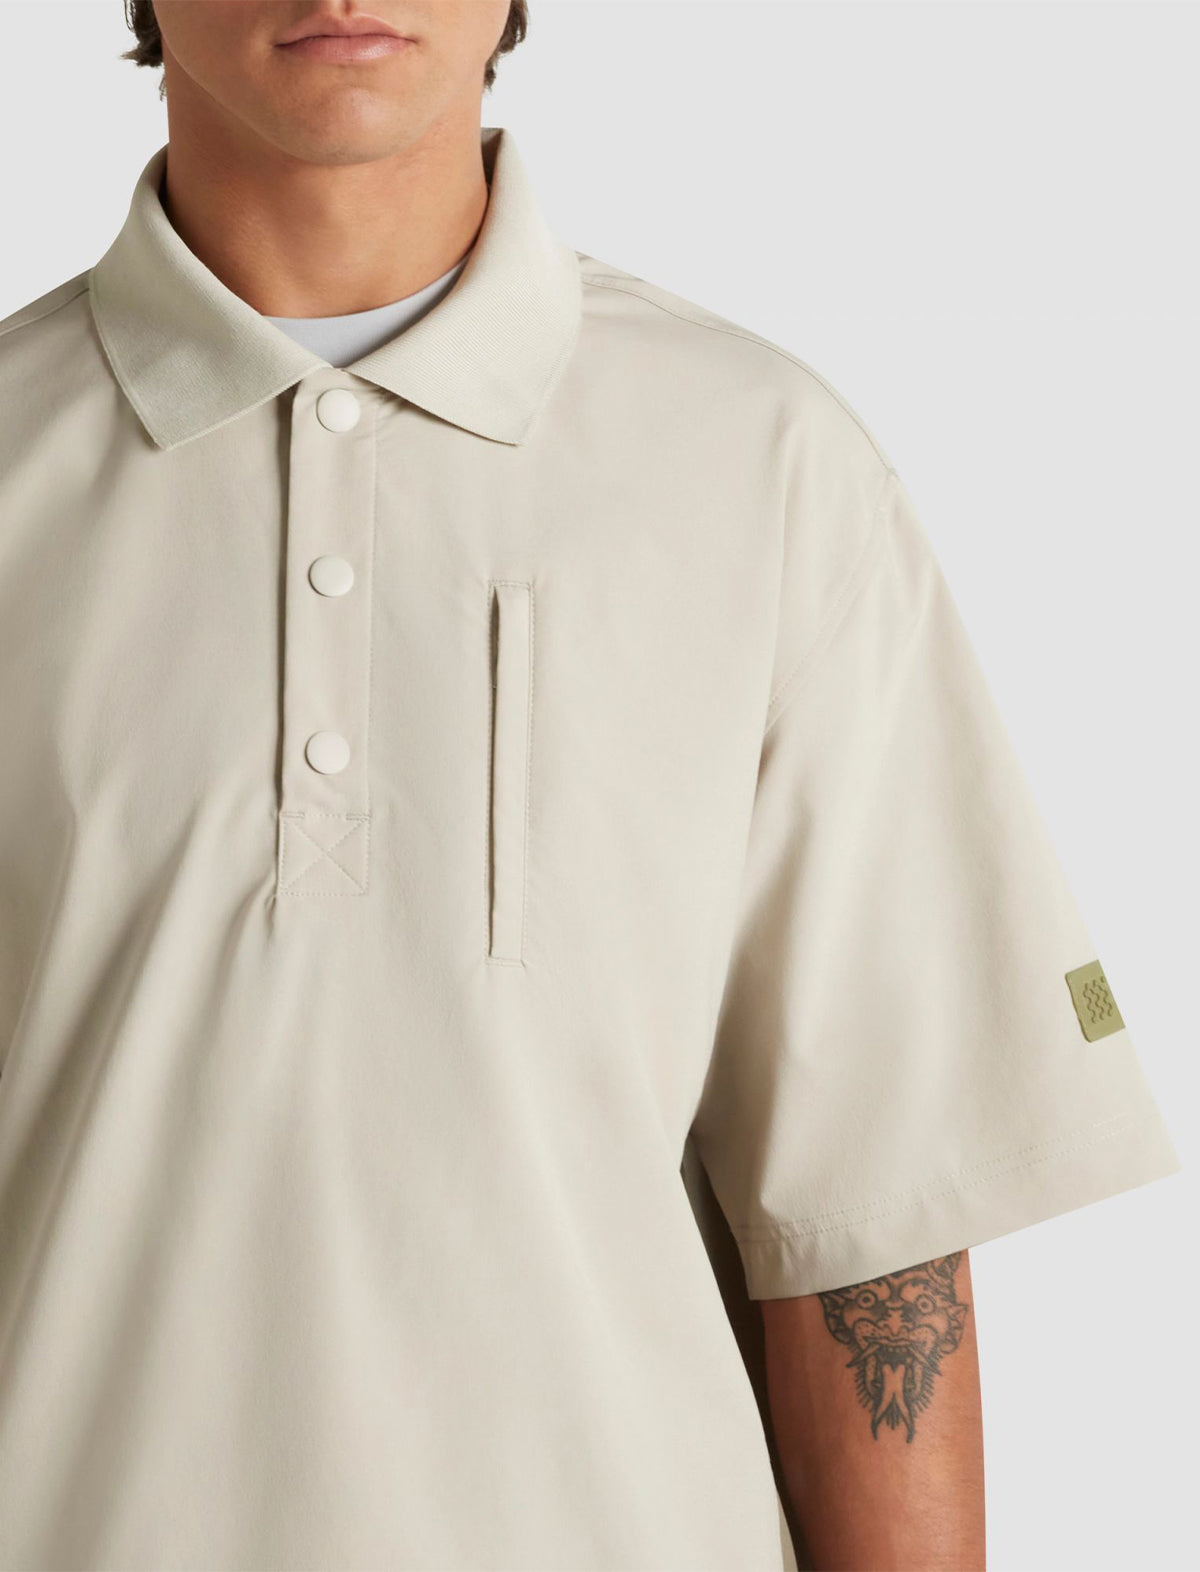 MANORS GOLF Shooter Shirt in Sand